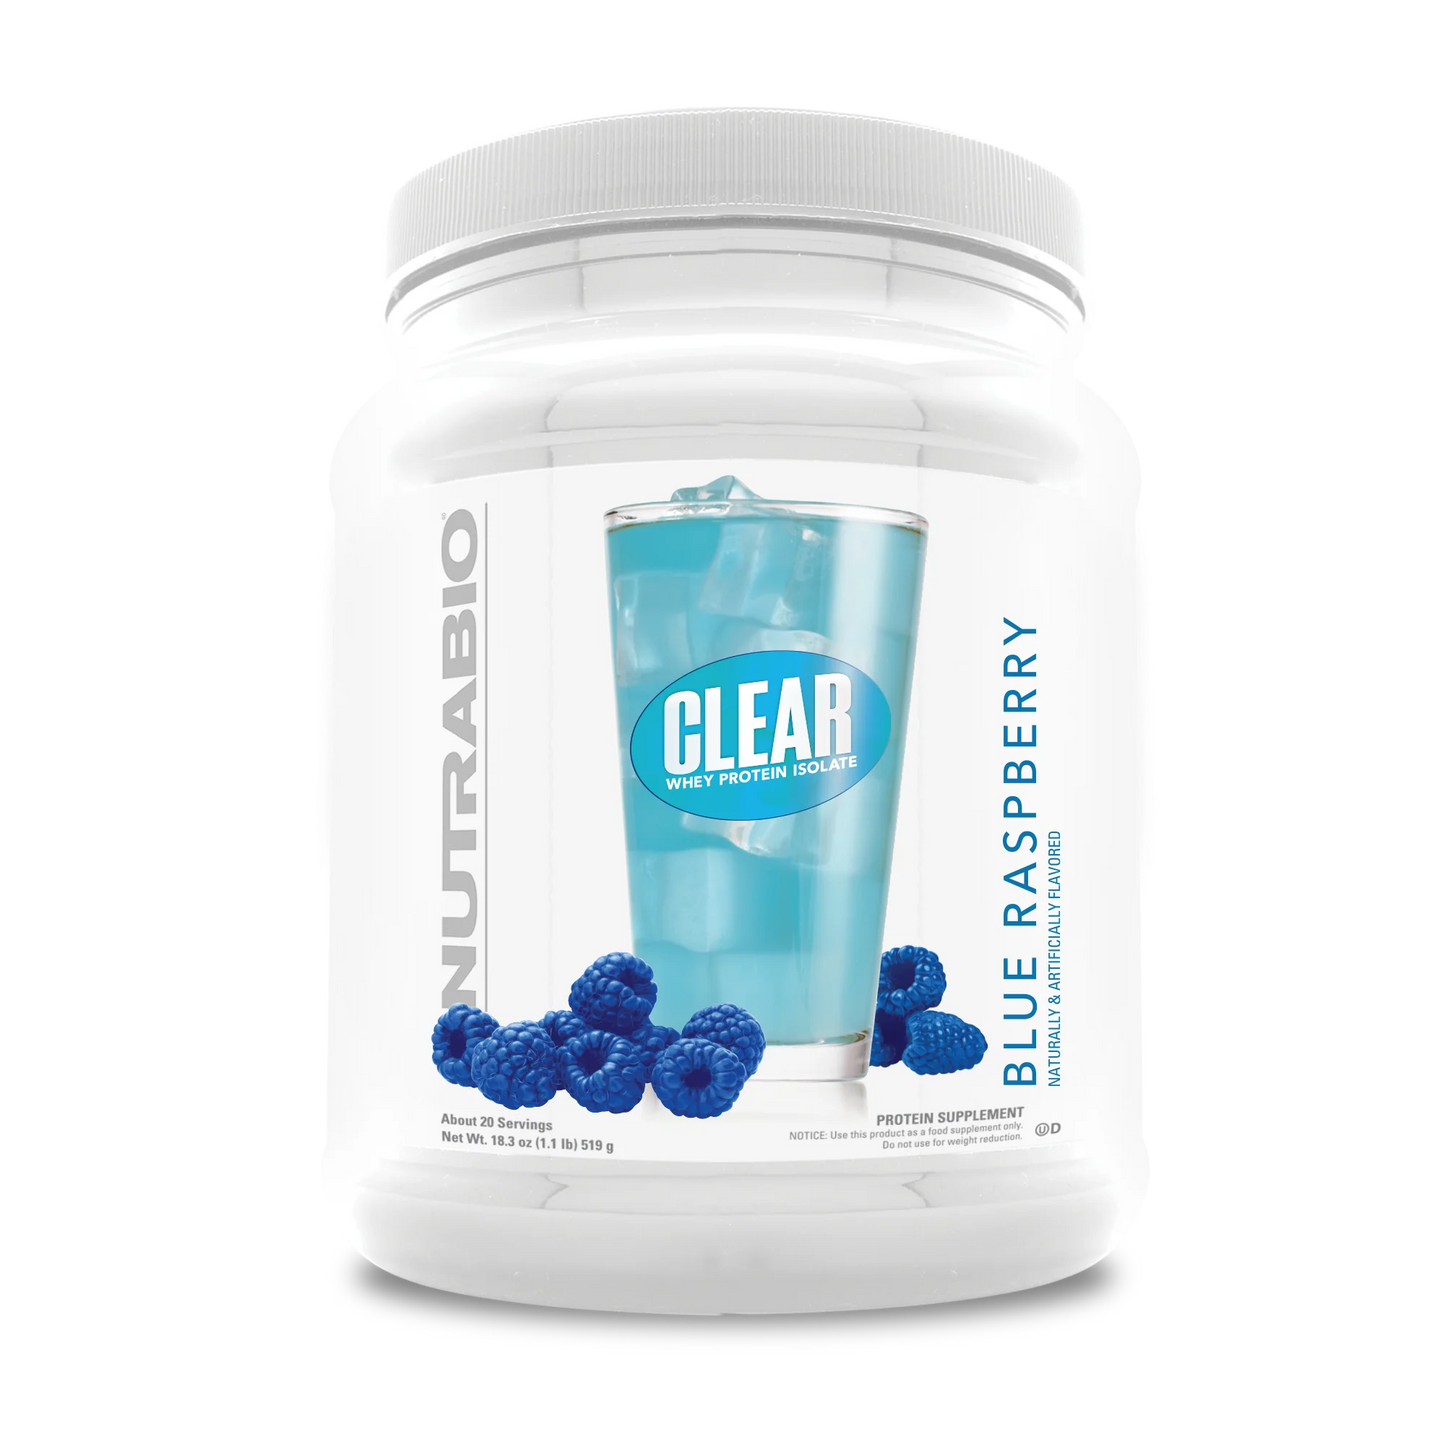 Clear Whey Isolate Protein by Nutrabio